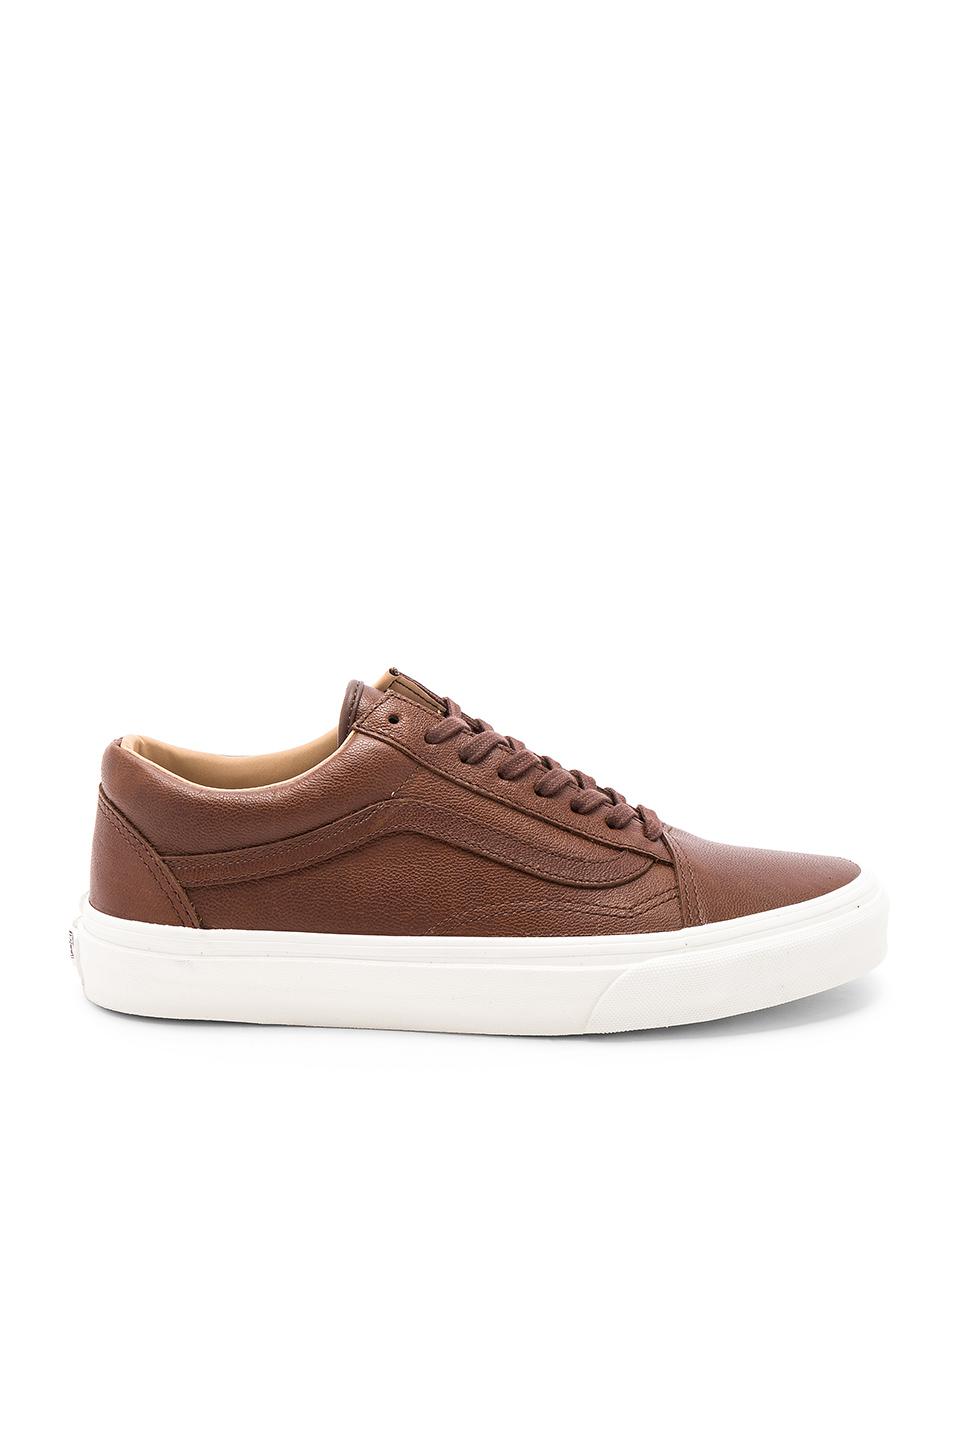 Old Skool Leather in Brown for Men - Lyst